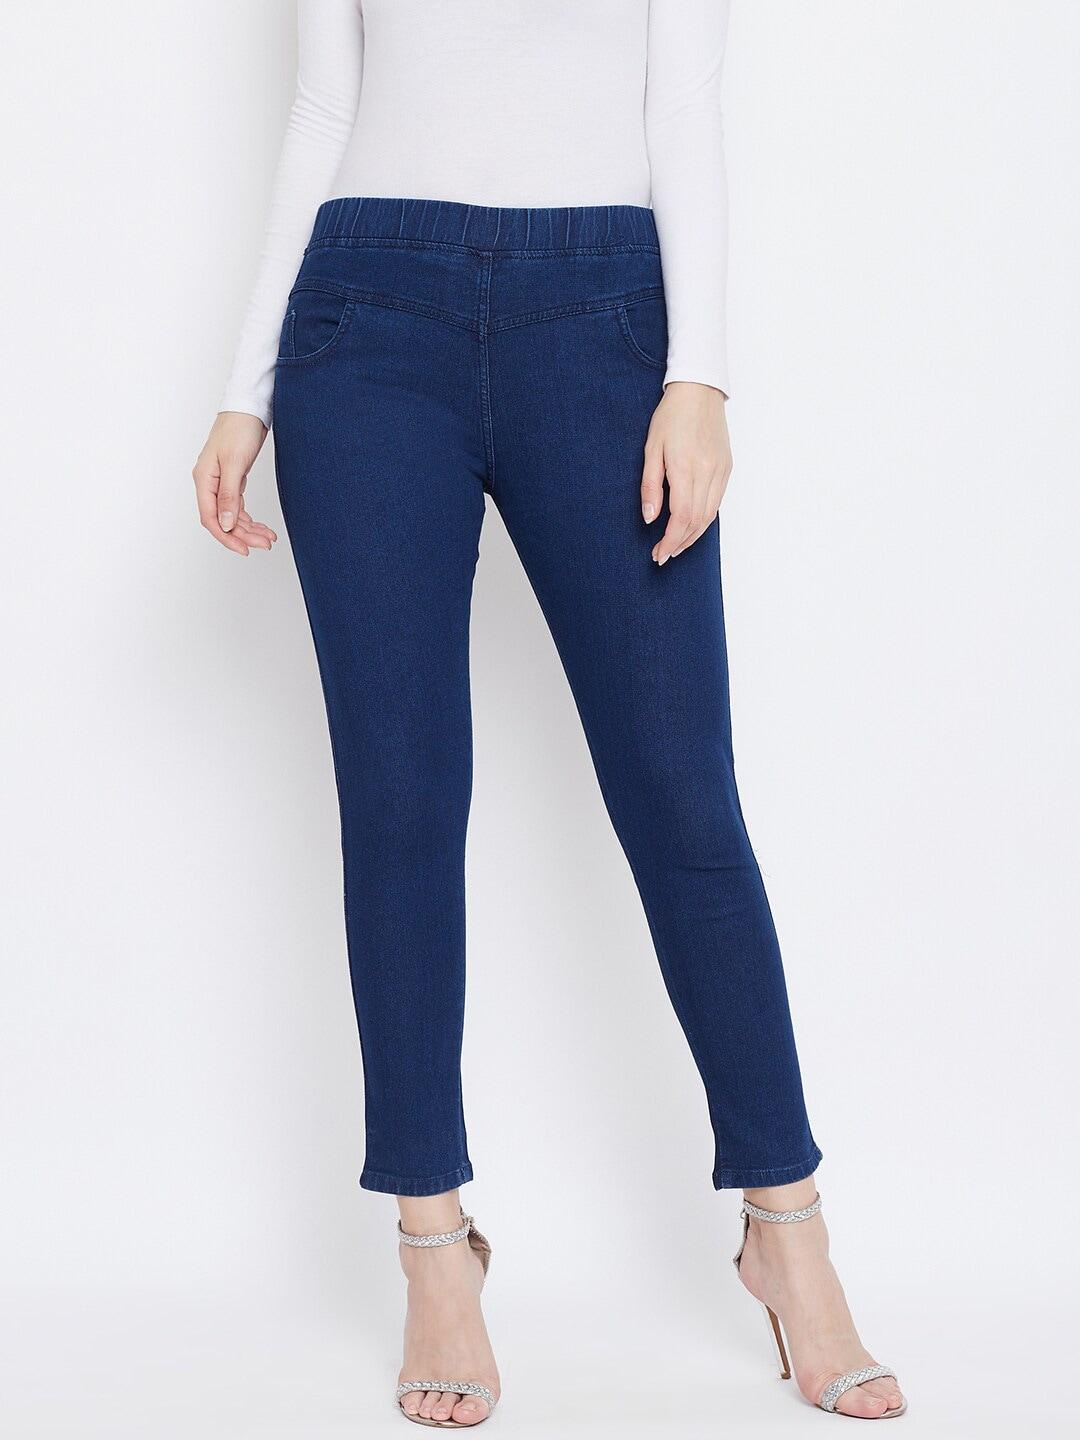 Clora Creation Women Navy Blue Solid Cotton Jeggings